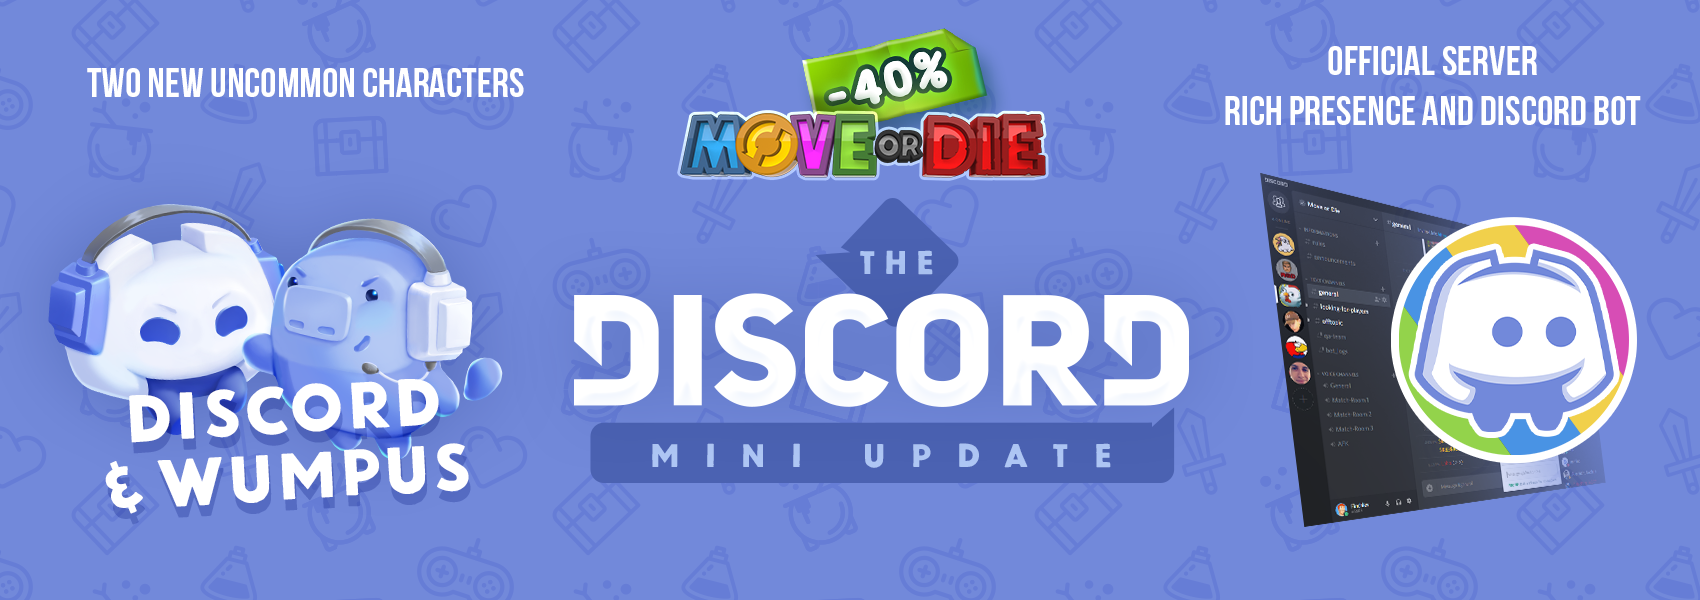 Move Or Die Announcing The Discord Mini Update Steamニュース